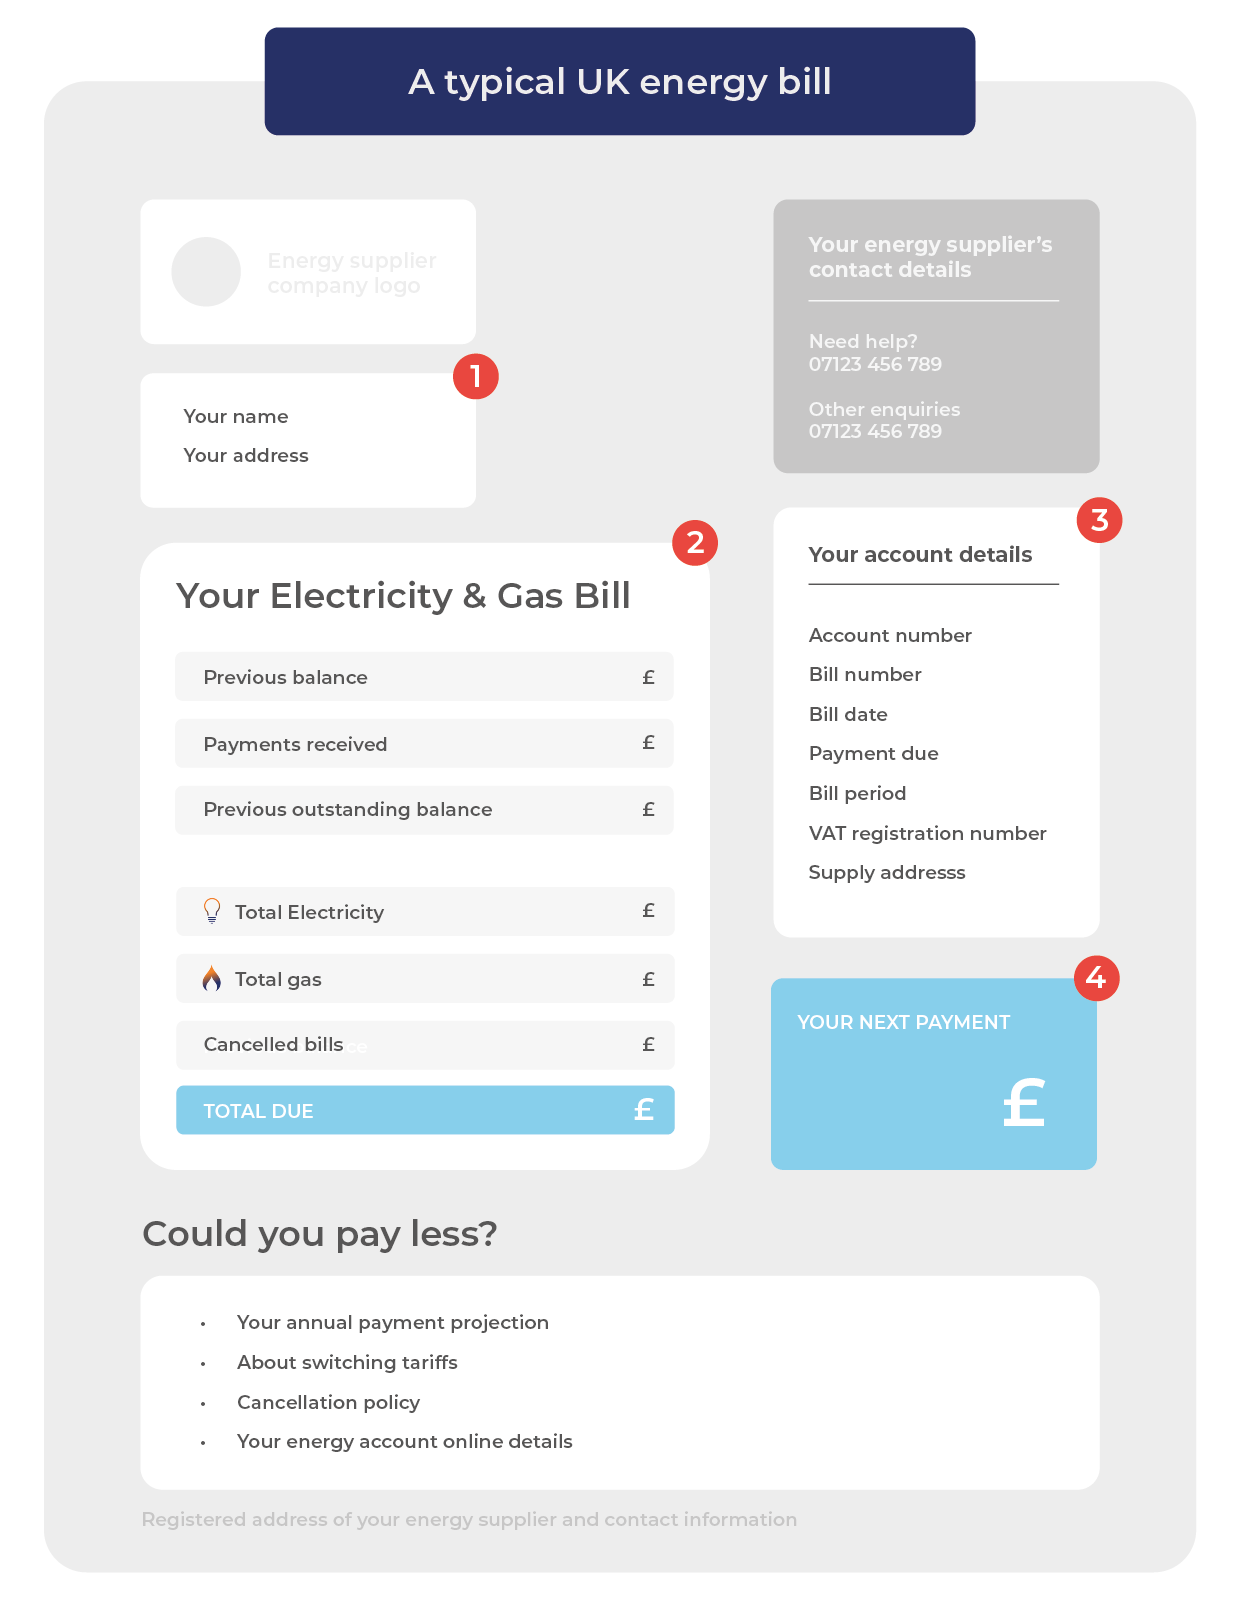 Illustration showing a typical UK energy bill